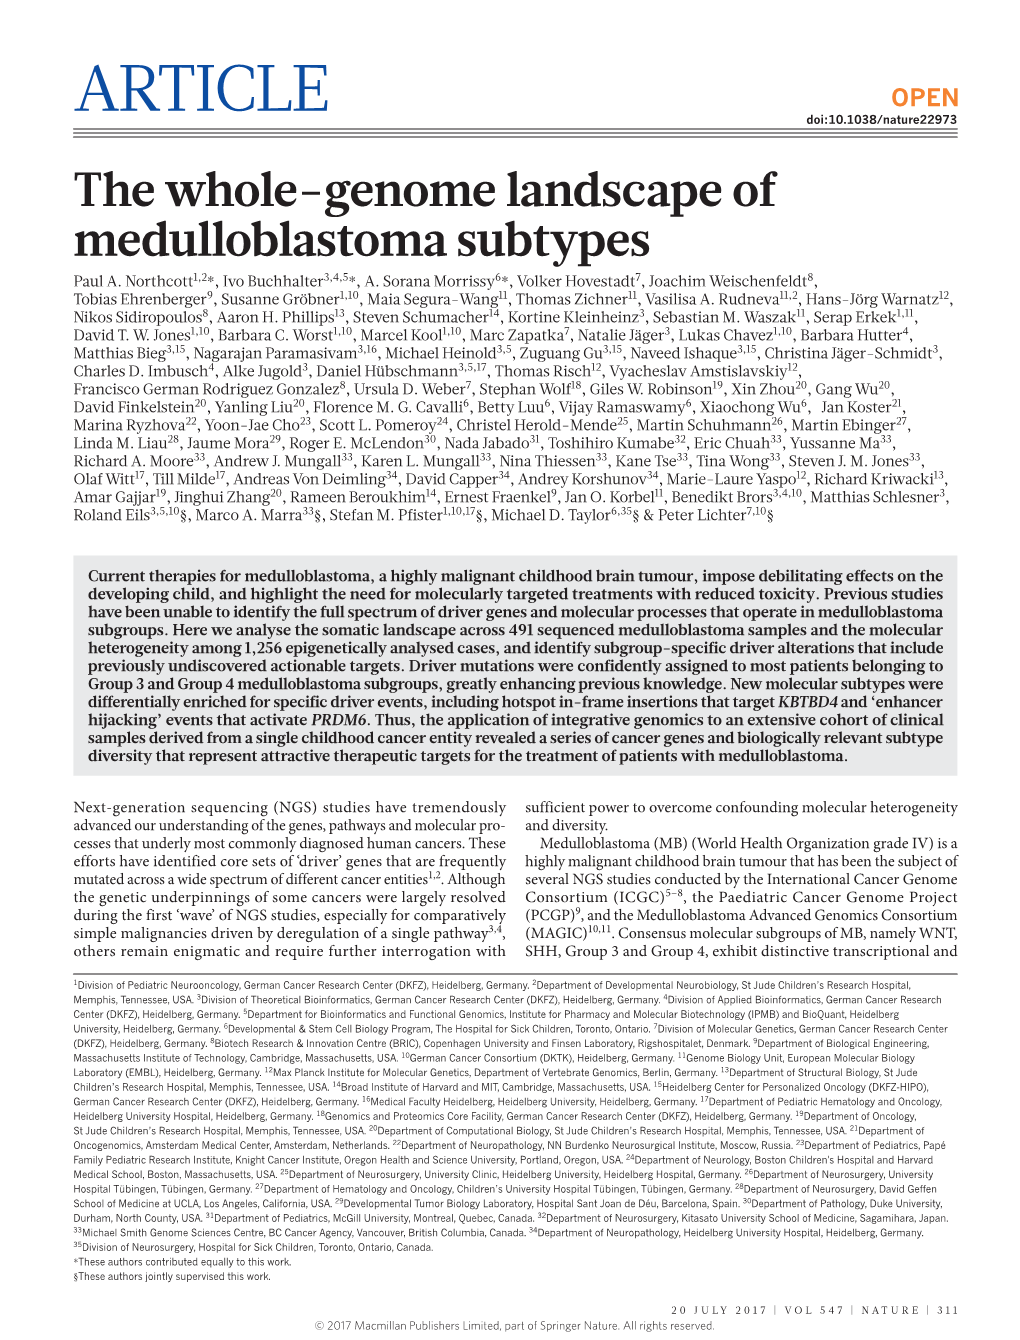 The Whole-Genome Landscape of Medulloblastoma Subtypes Paul A